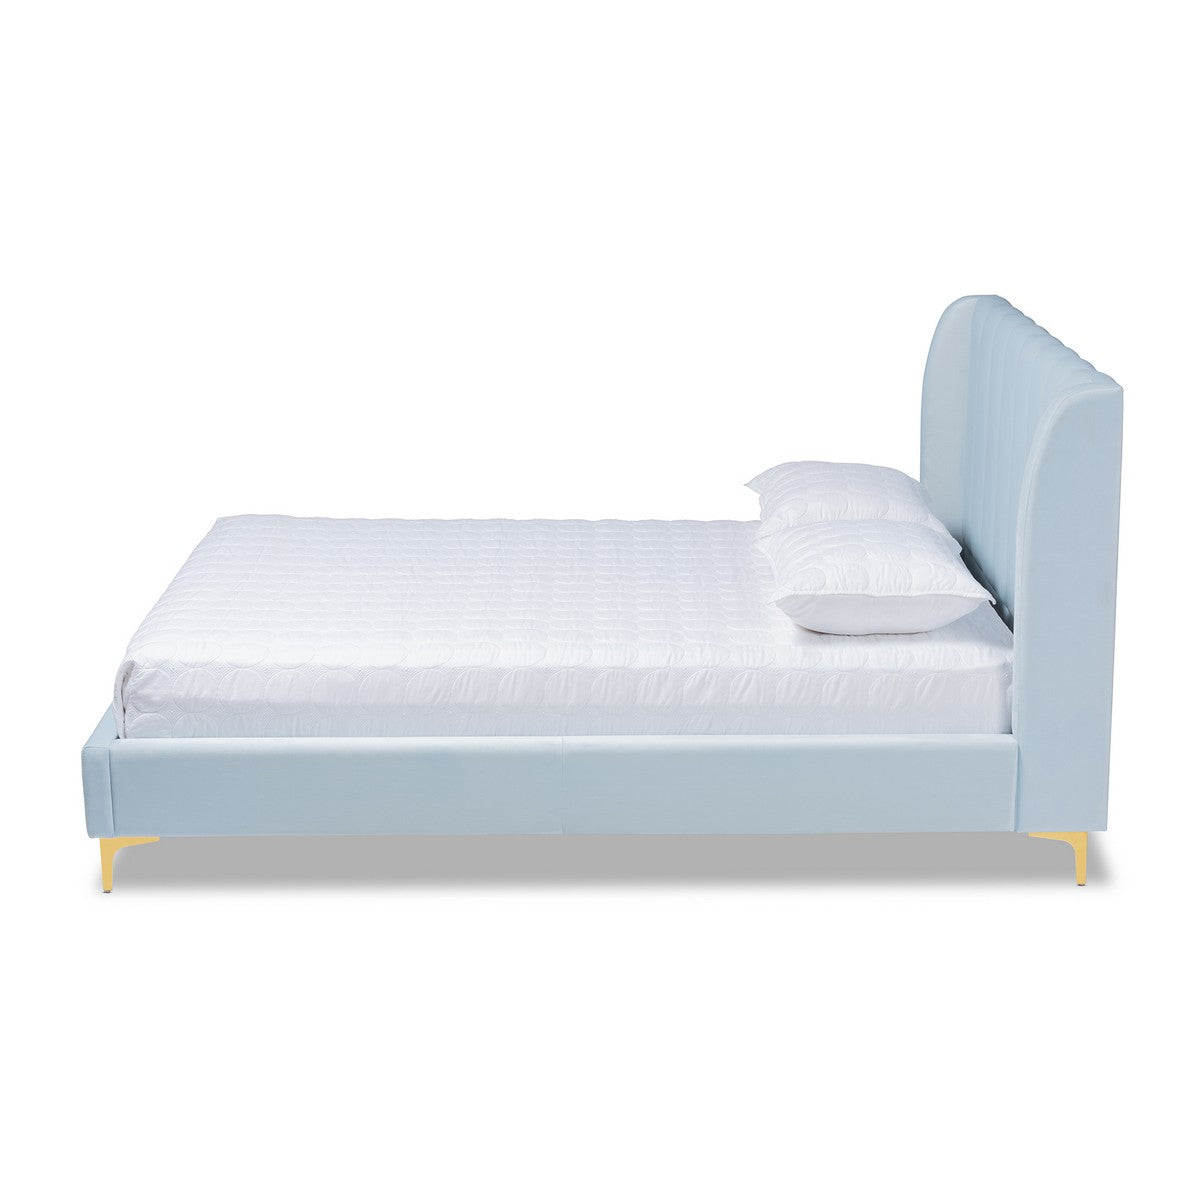 Baxton Studio Saverio Glam and Luxe Light Blue Velvet Fabric Upholstered Queen Size Platform Bed with Gold-Tone Legs Baxton Studio-beds-Minimal And Modern - 1